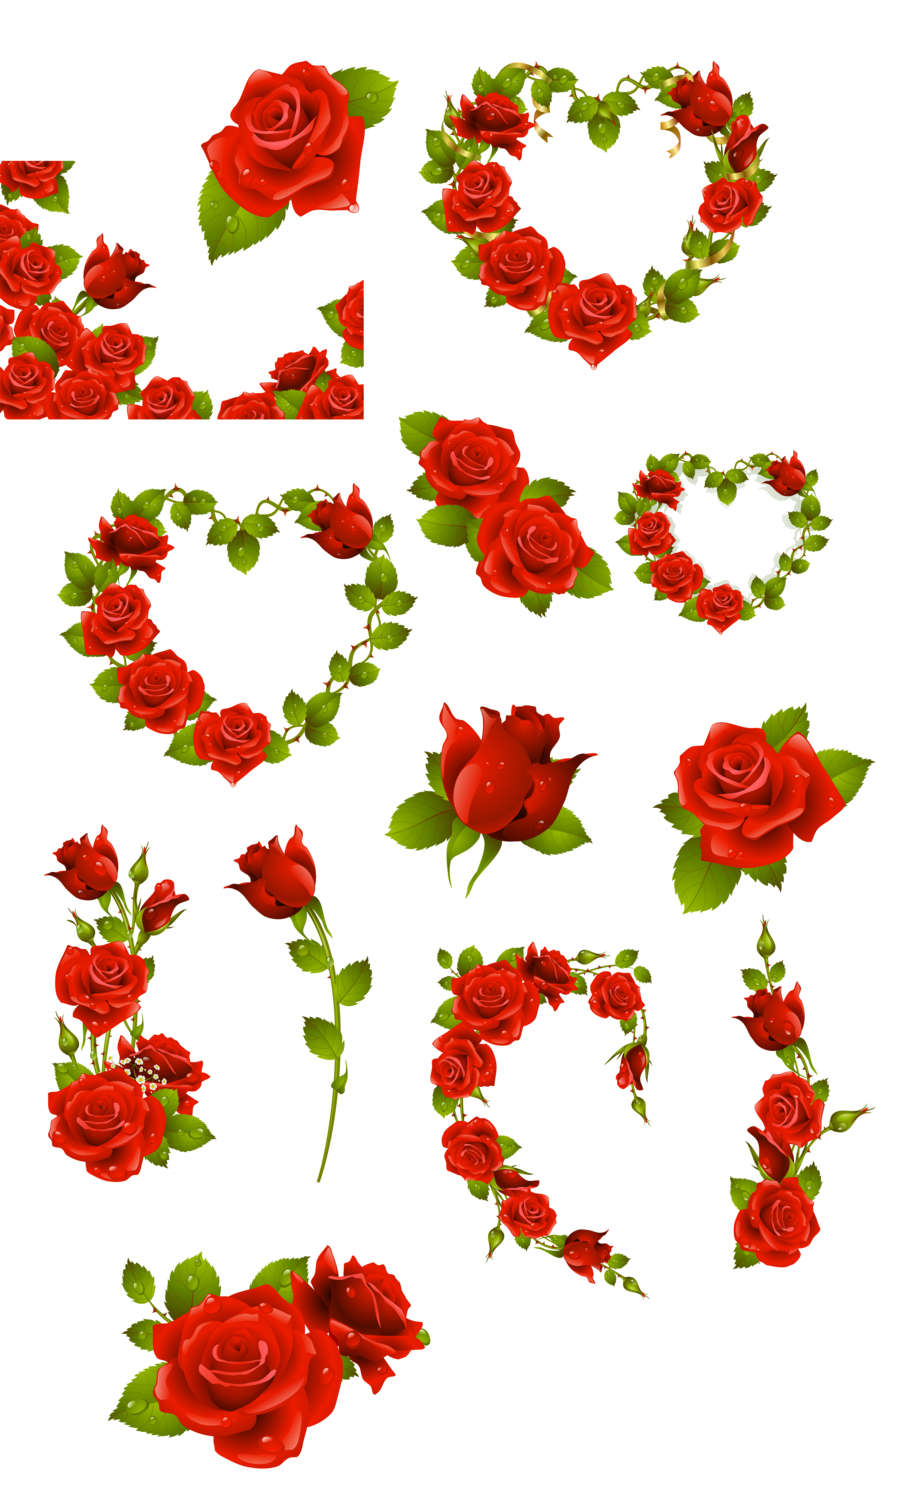 rose clipart english rose